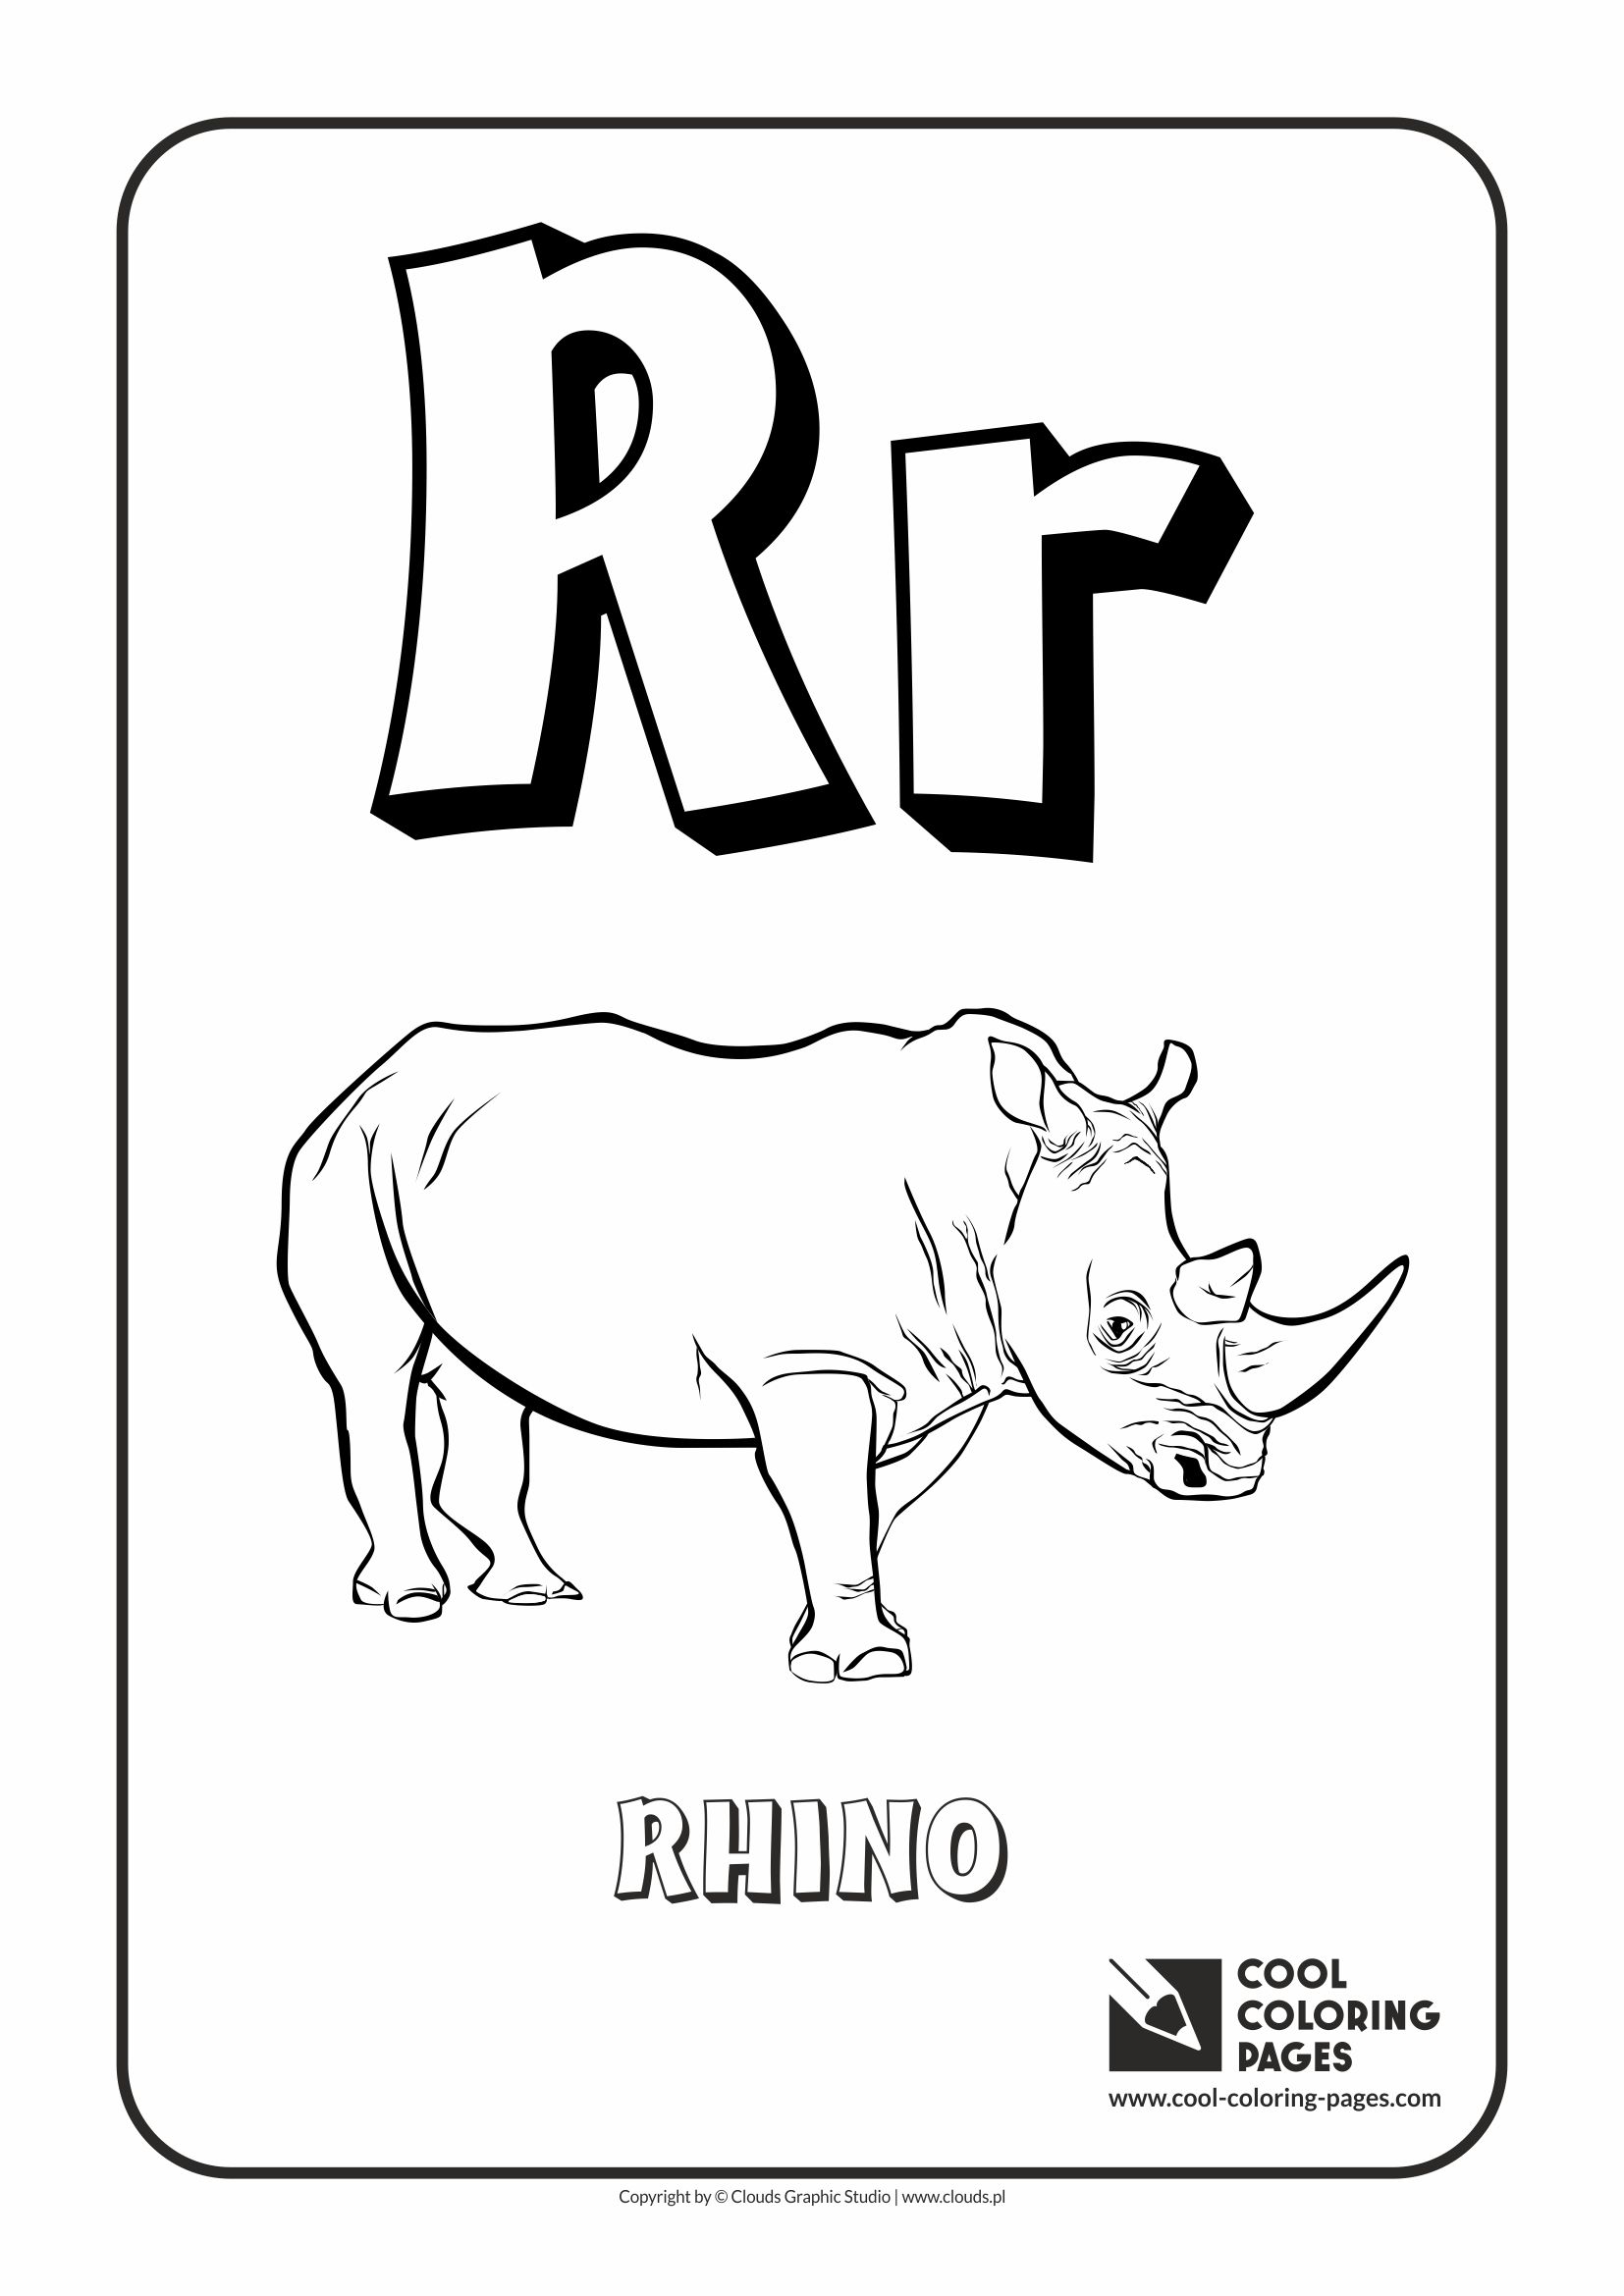 Cool Coloring Pages - Alphabet / Letter R / Coloring page with letter R